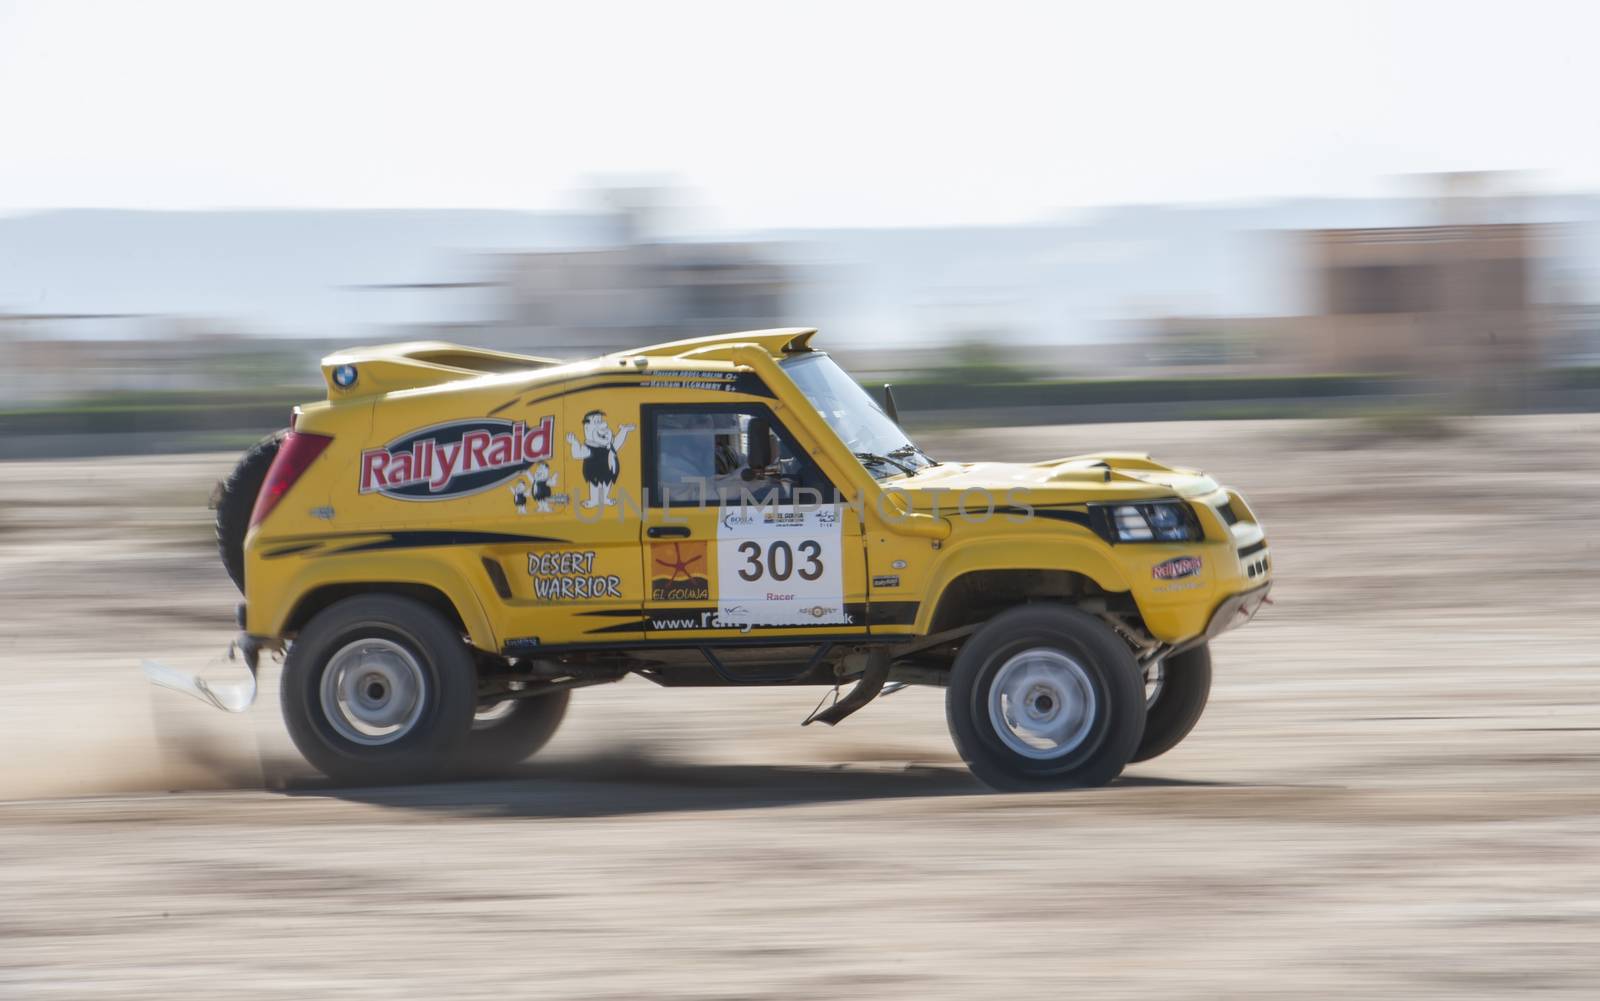 Off-road truck competing in a desert rally by paulvinten